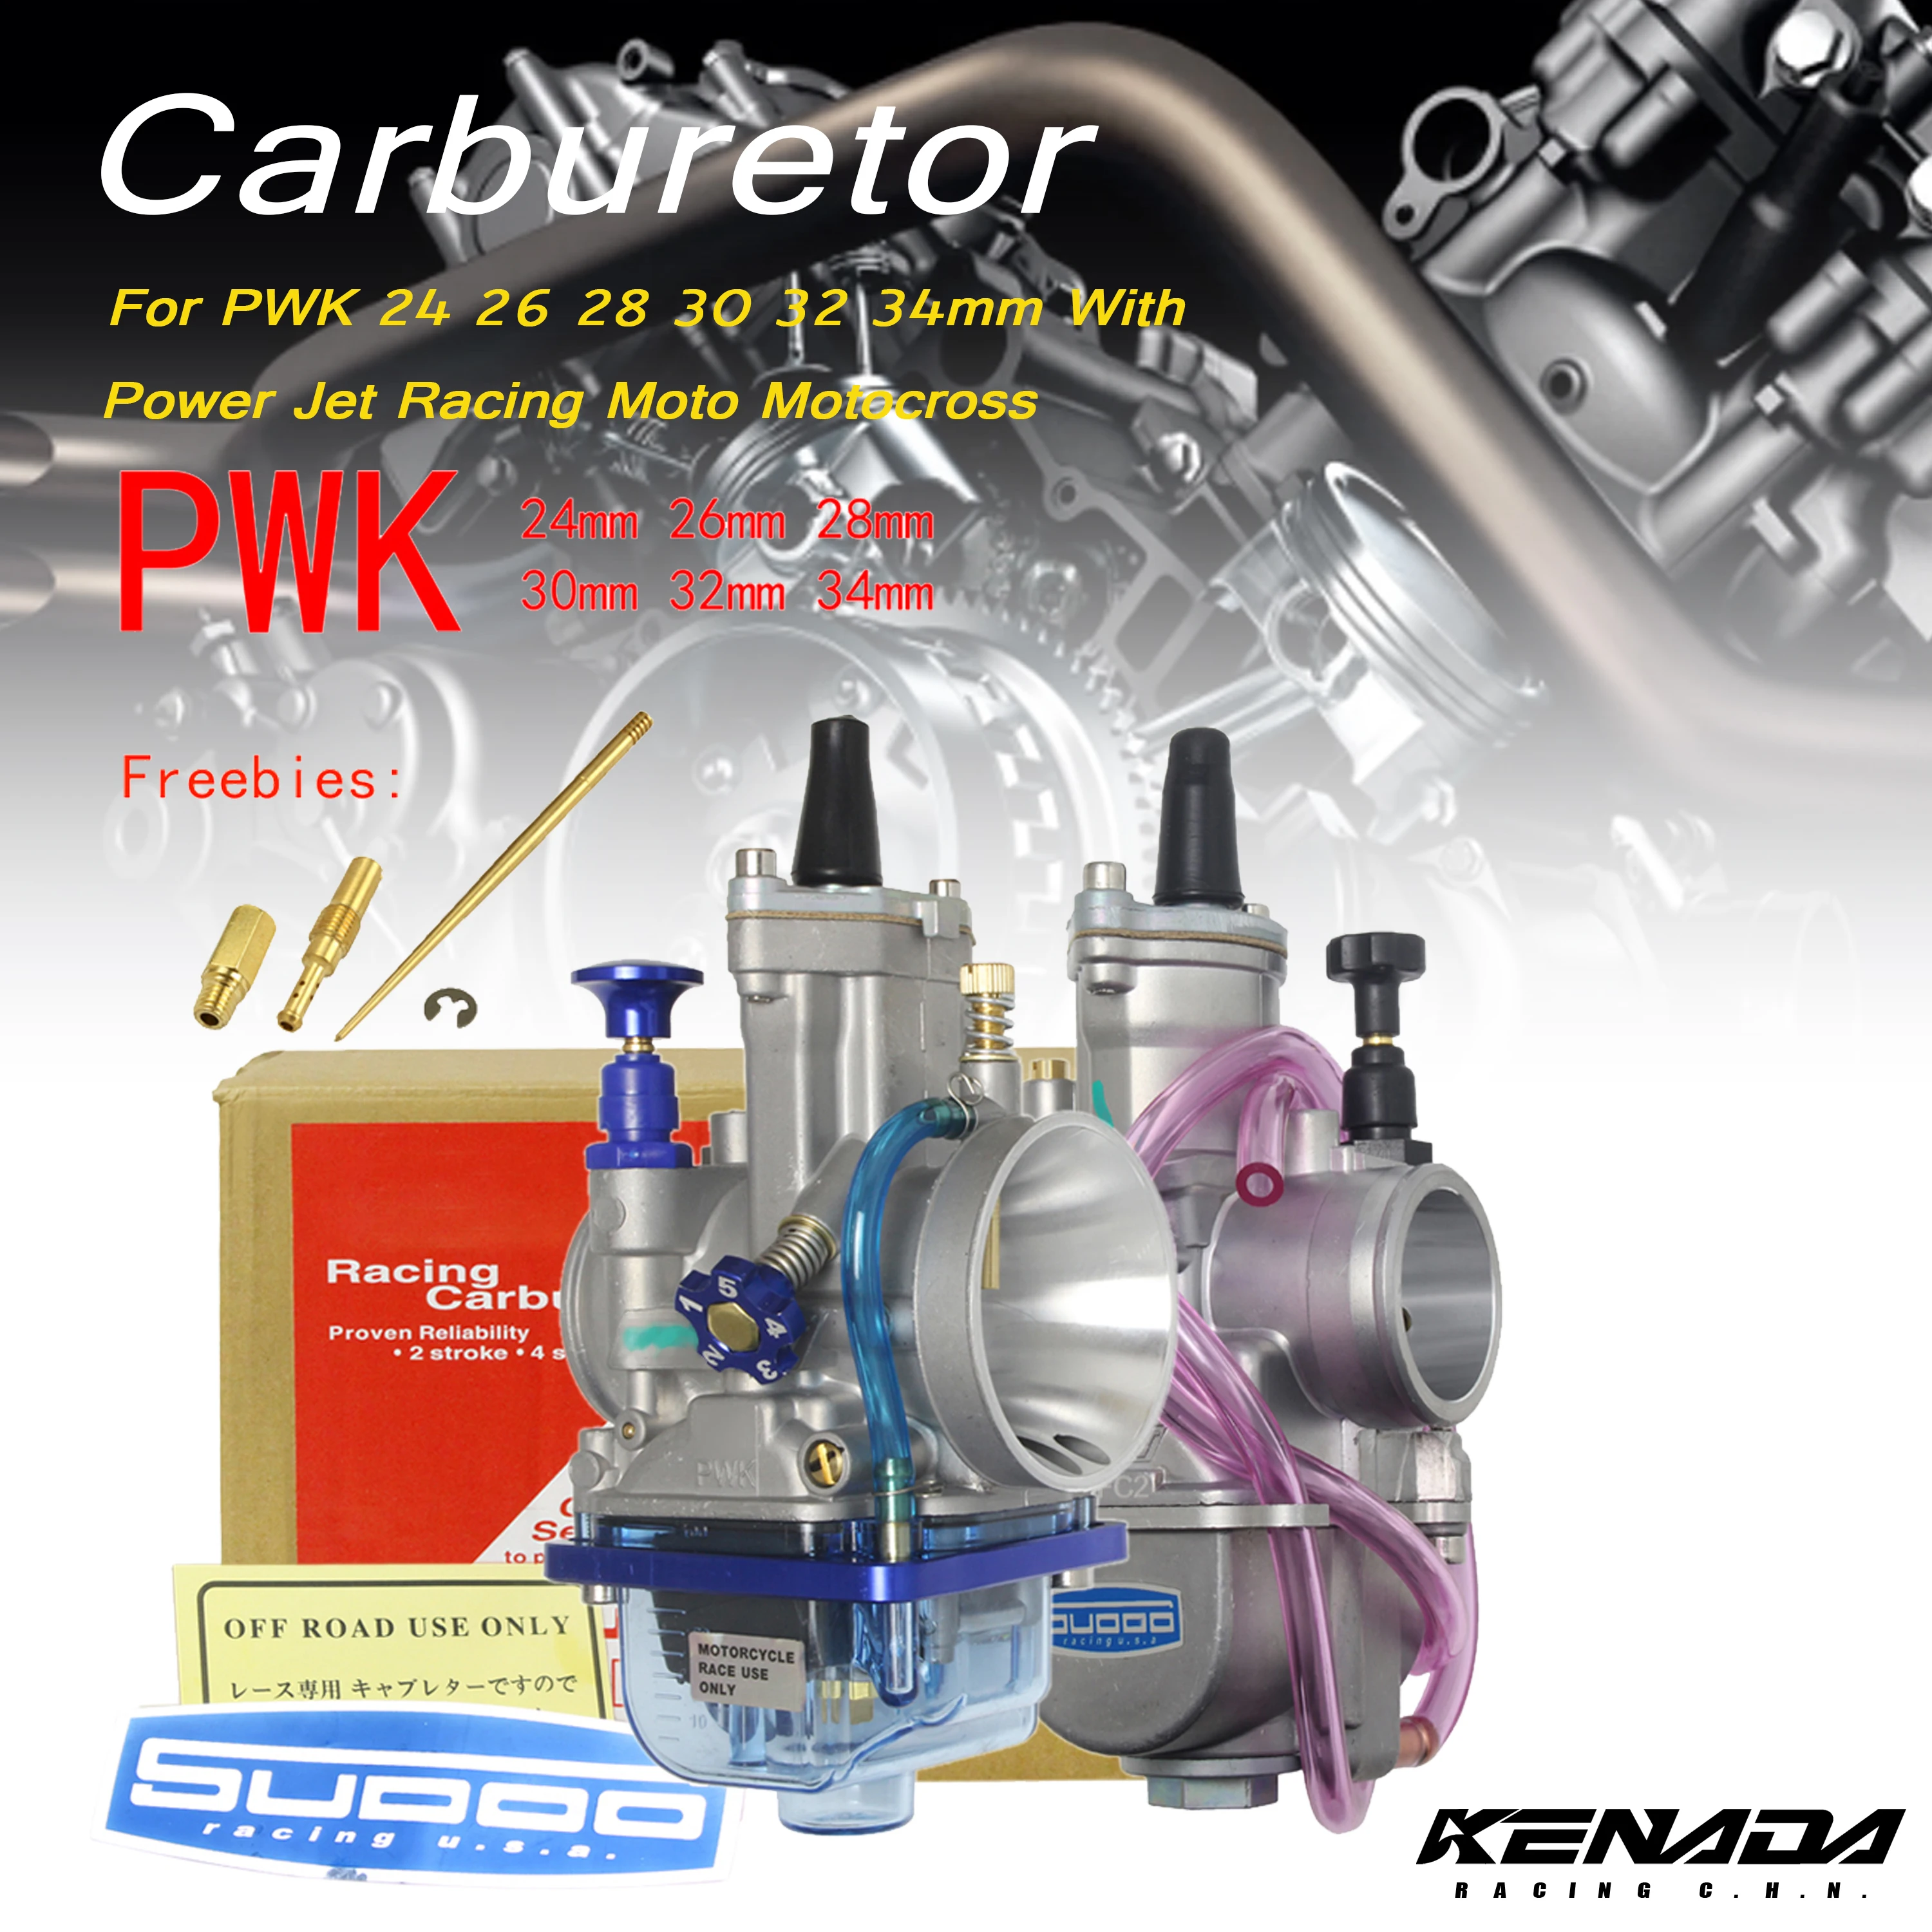 

Motorcycle Carburetor Carb 16100-GBF-B42 For PWK 24 26 28 30 32 34mm With Power Jet Racing Moto Motocross